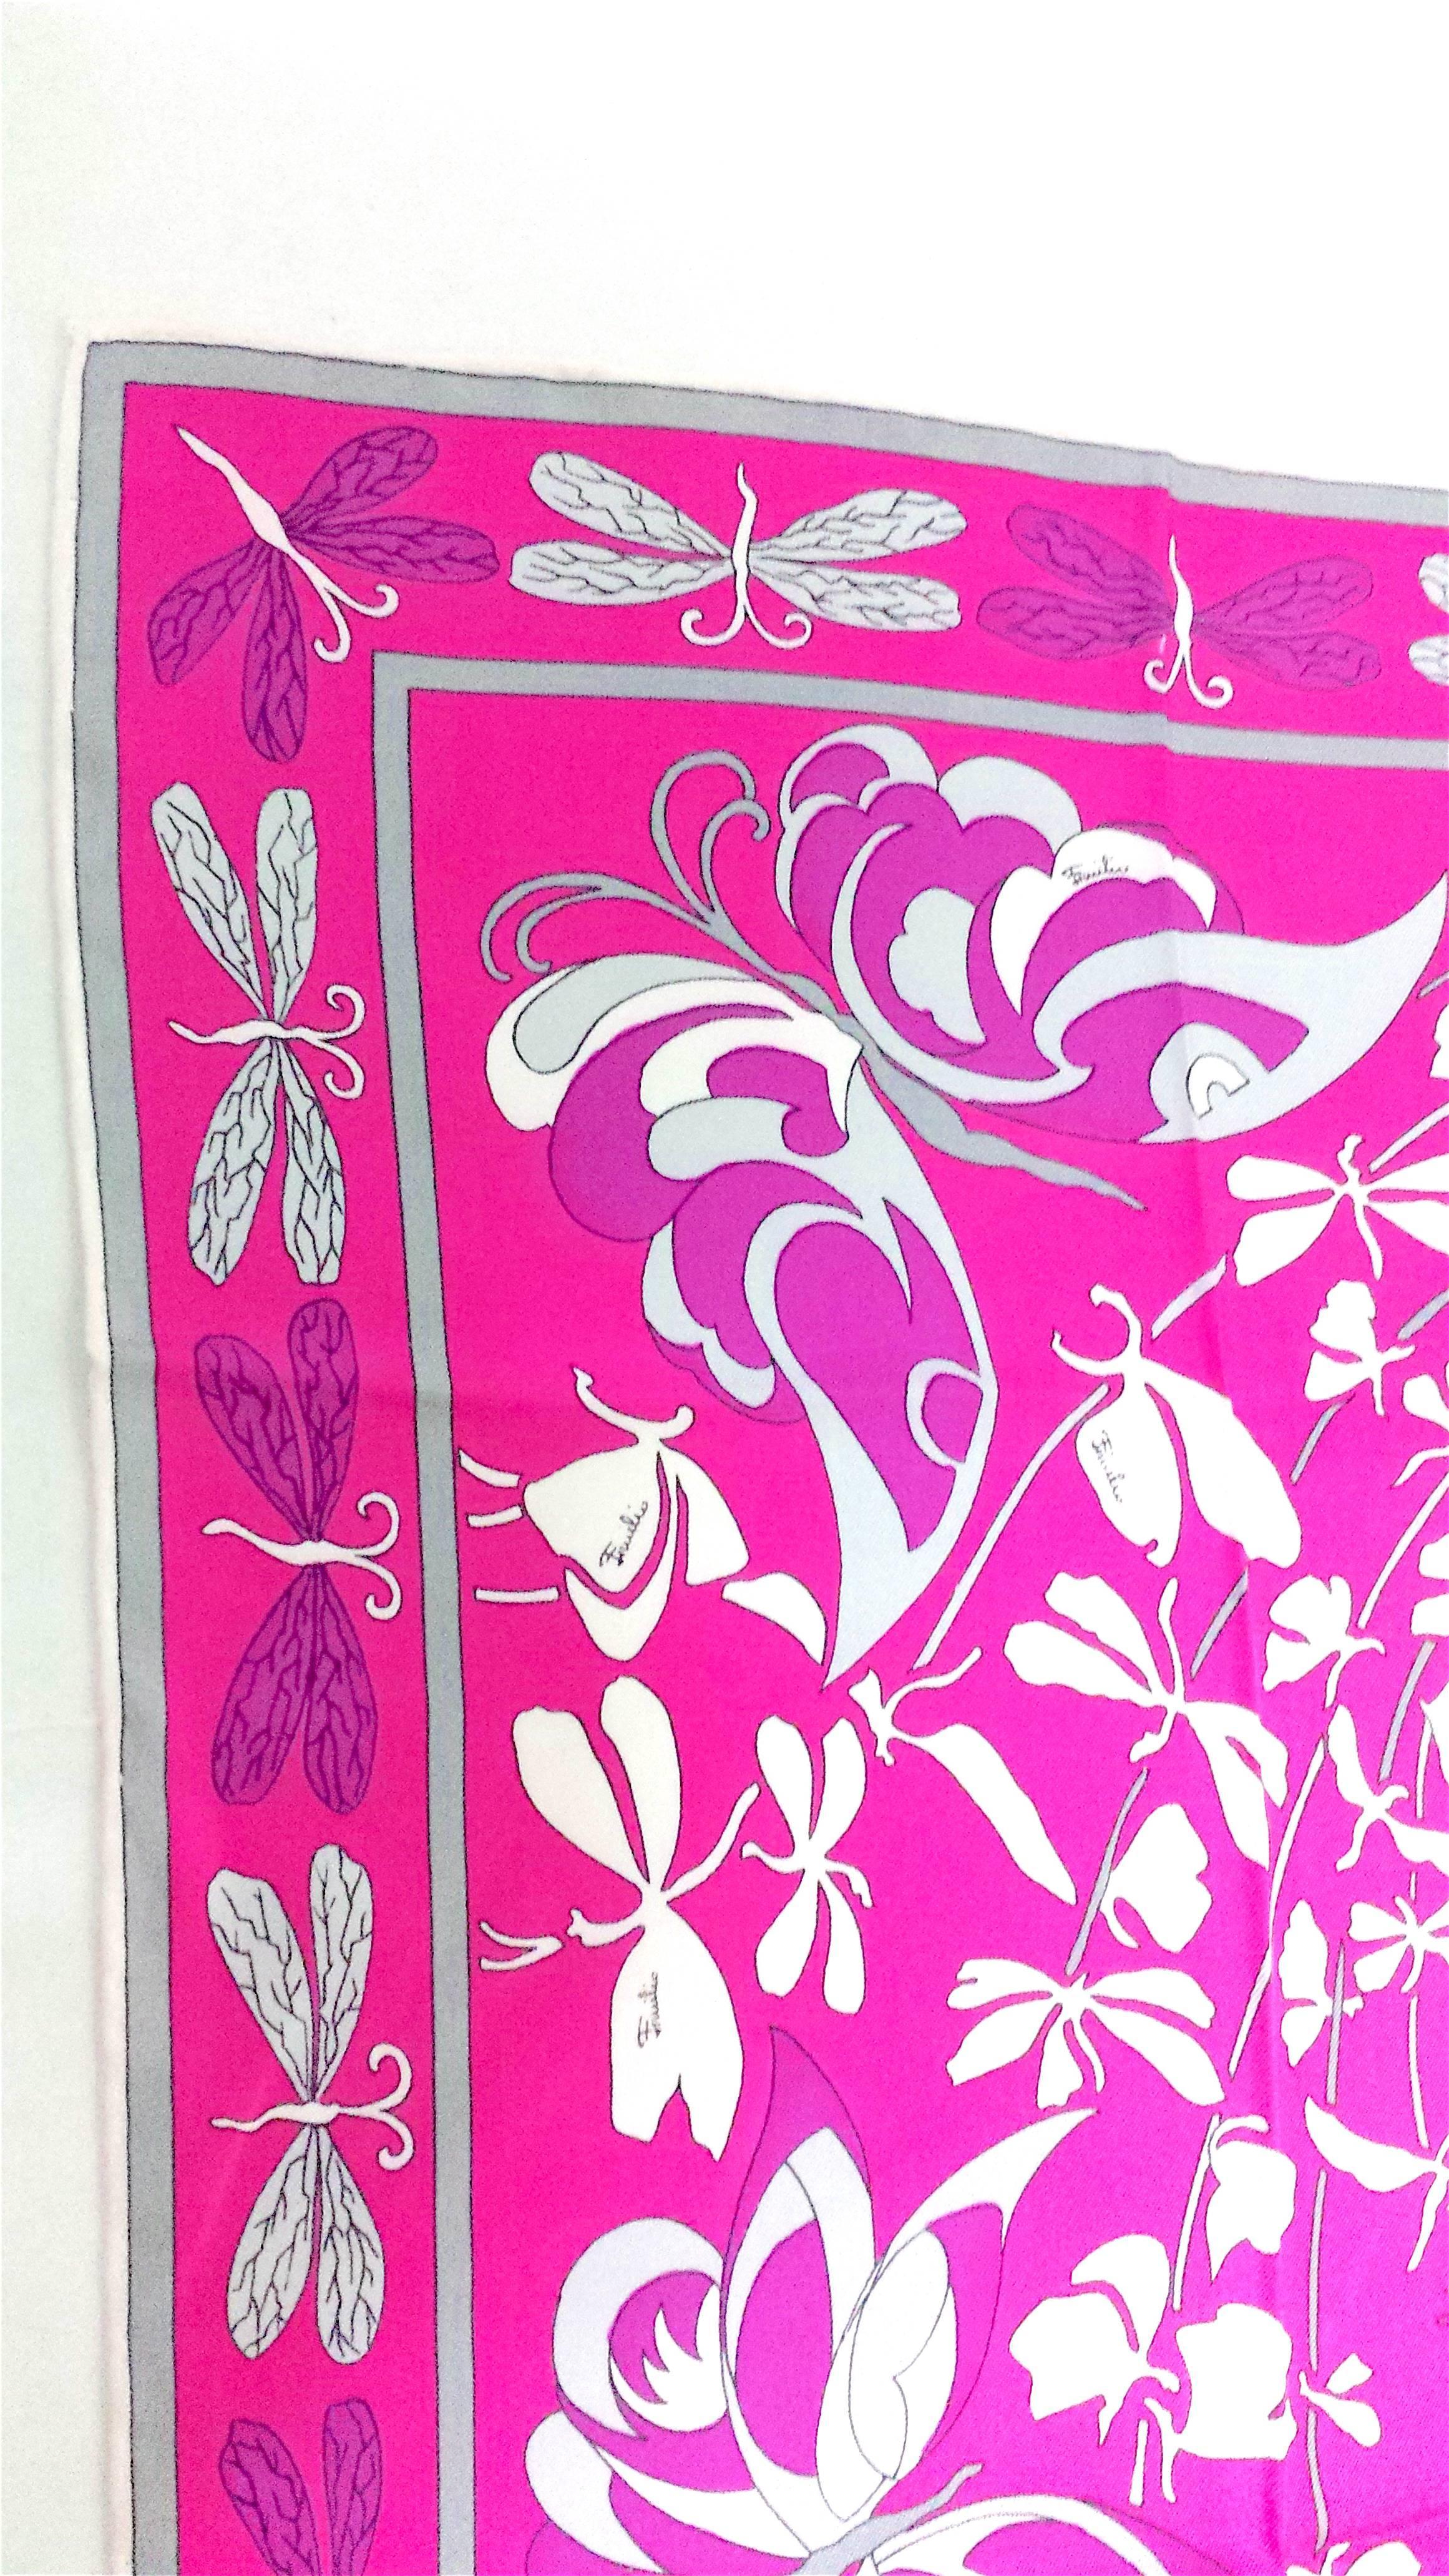 Lucious Emilio Pucci Signature Silk Scarf -Never Worn and in Original Case In Excellent Condition For Sale In West Palm Beach, FL